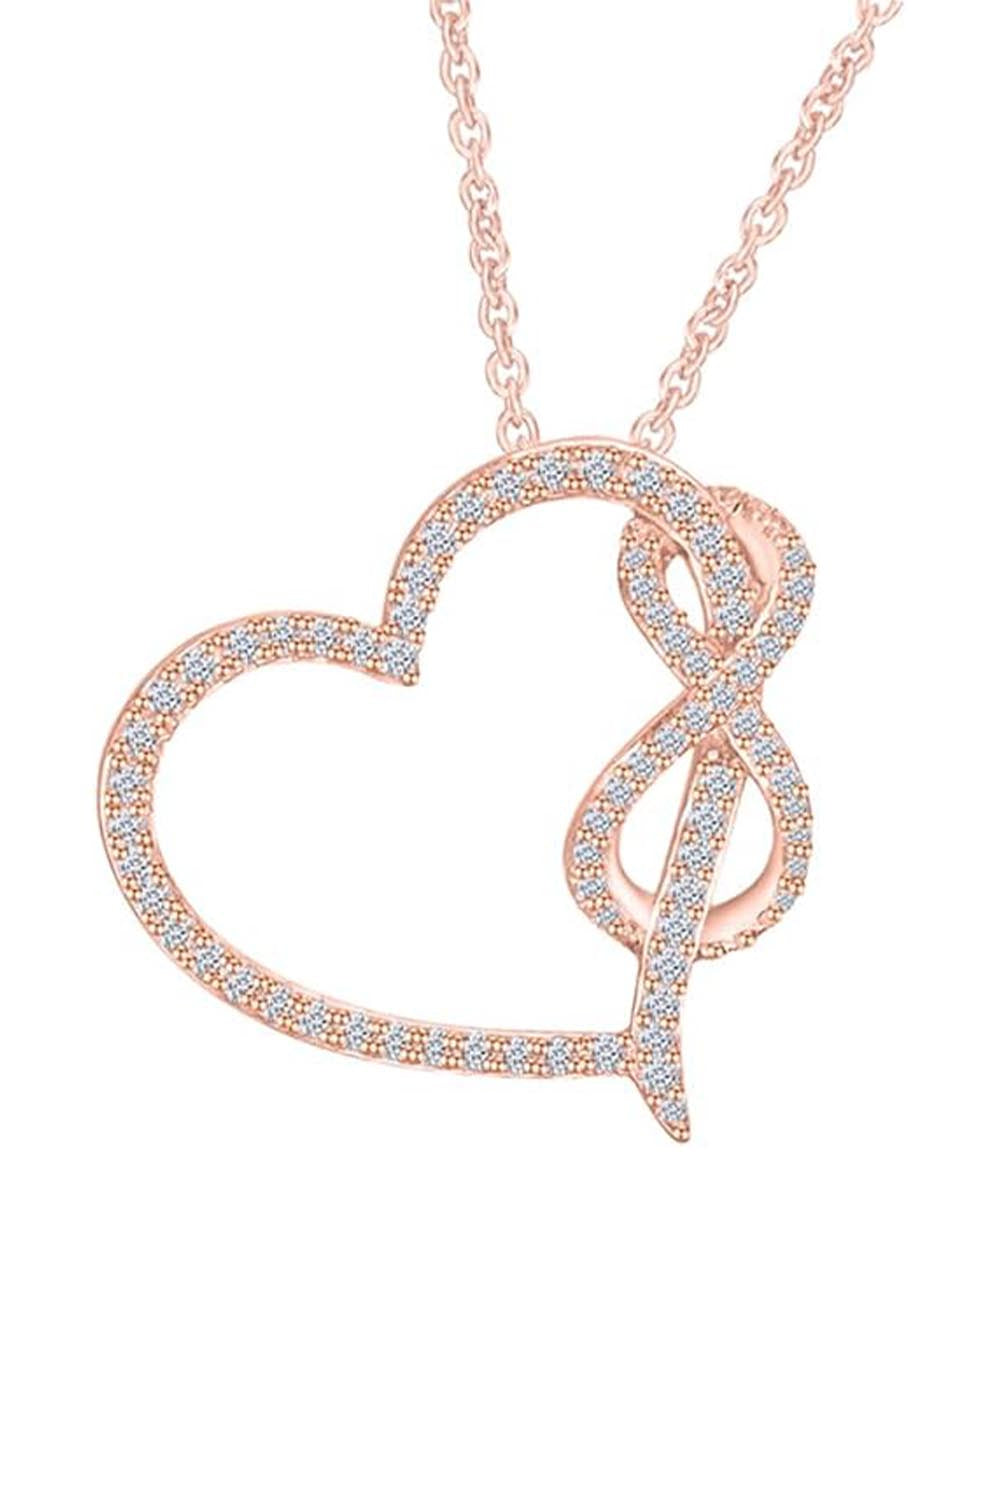 Rose Gold Color 1/3 Carat Moissanite Heart Infinity Pendant Necklace